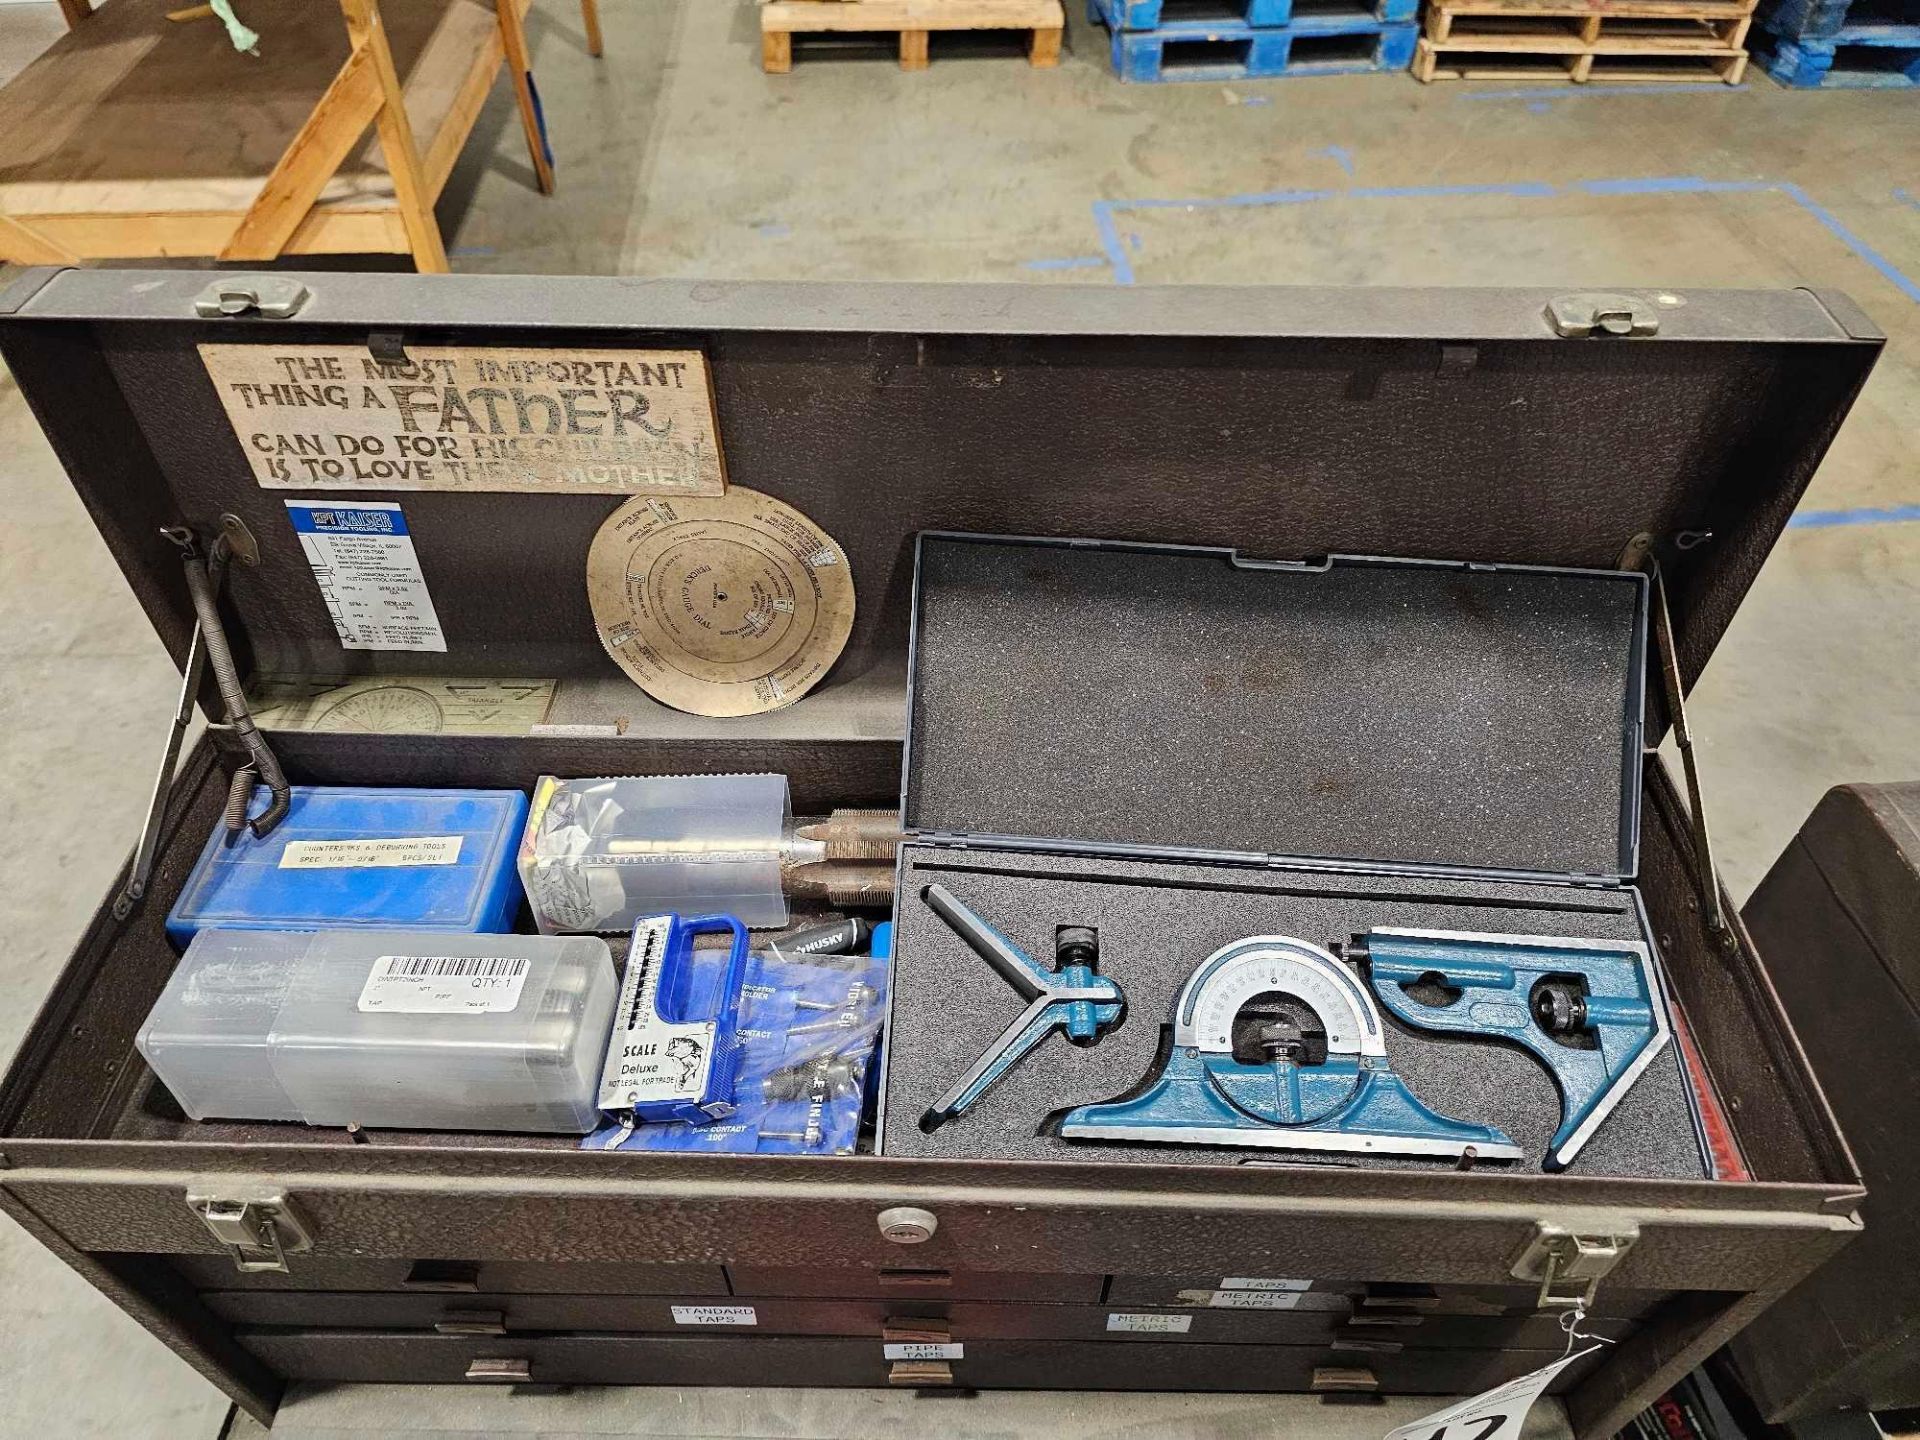 KENNEDY TOOL BOXES LOADED WITH MACHINISTS TOOLS AND MEASURING DEVICES - Image 6 of 45